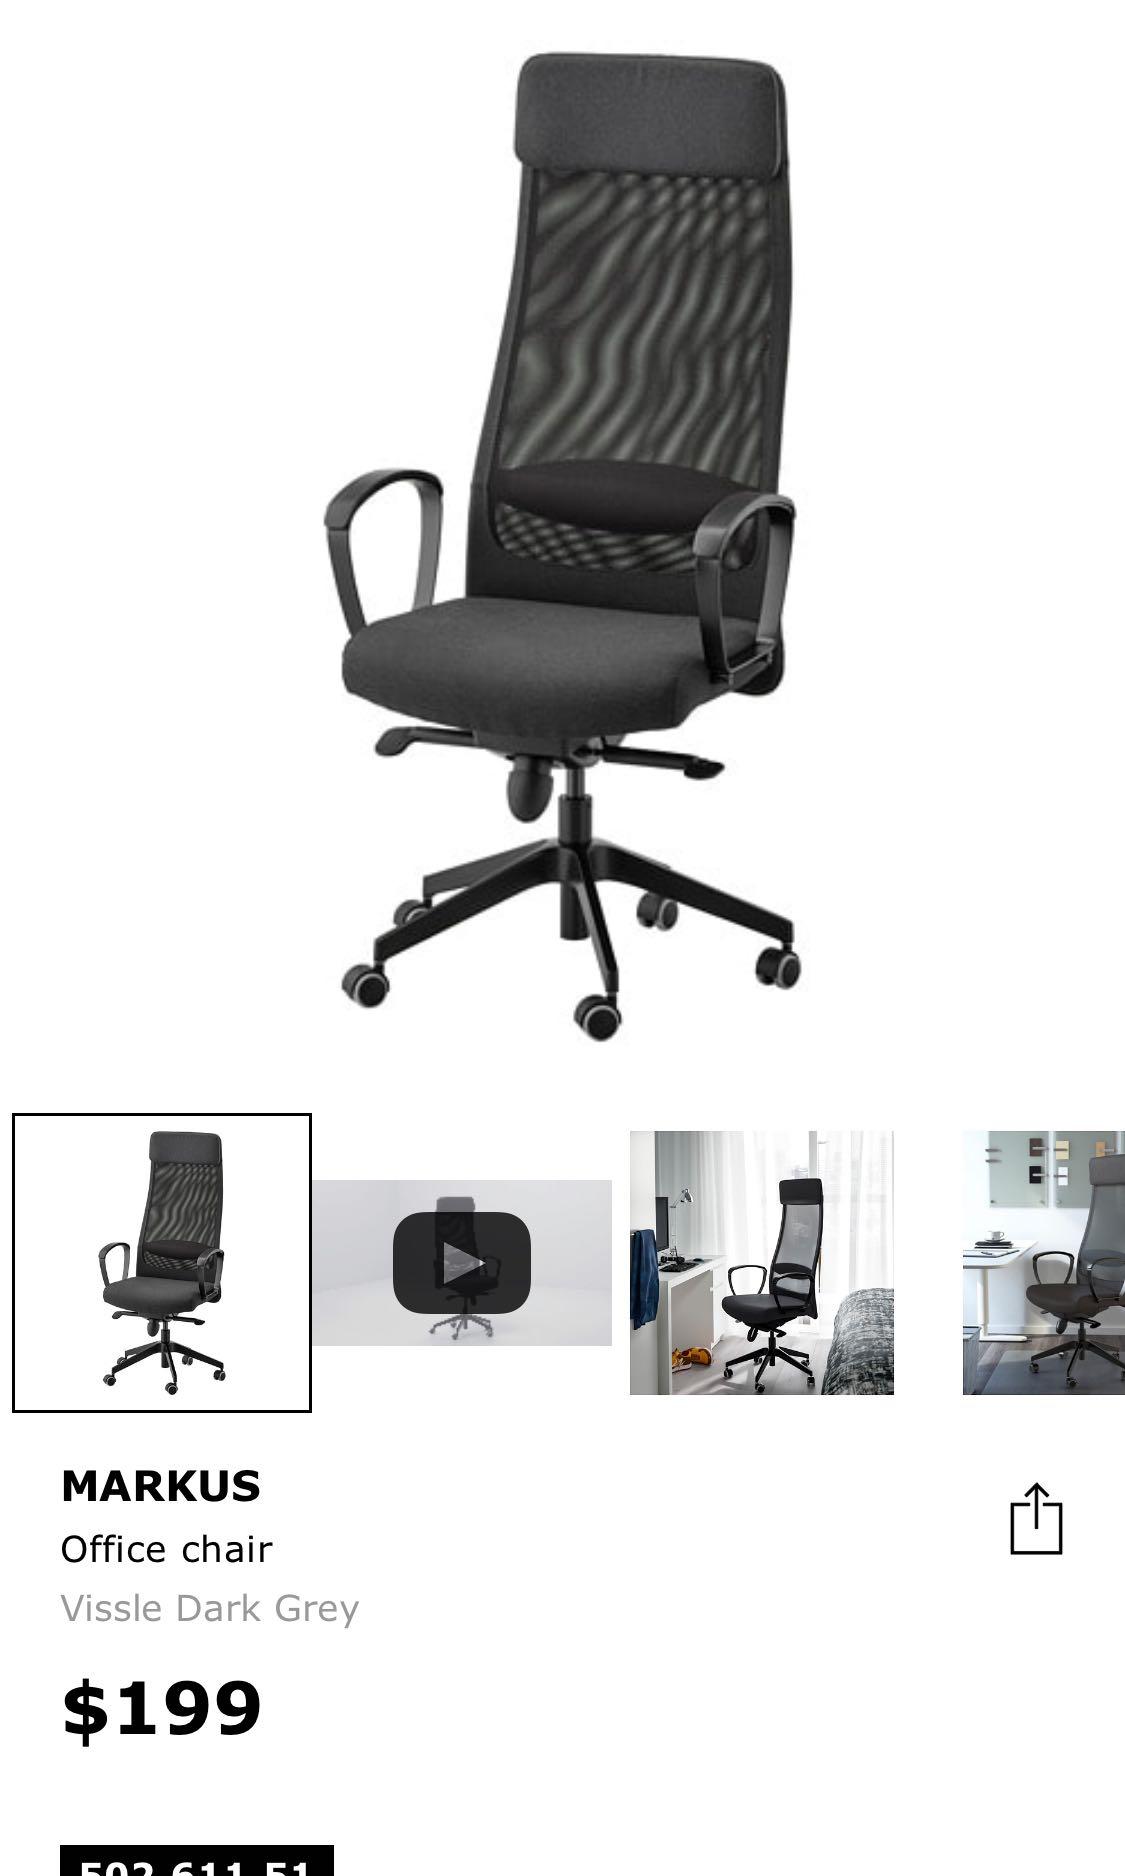 Ikea Markus Office Chair Used Furniture Home Living Furniture Chairs On Carousell